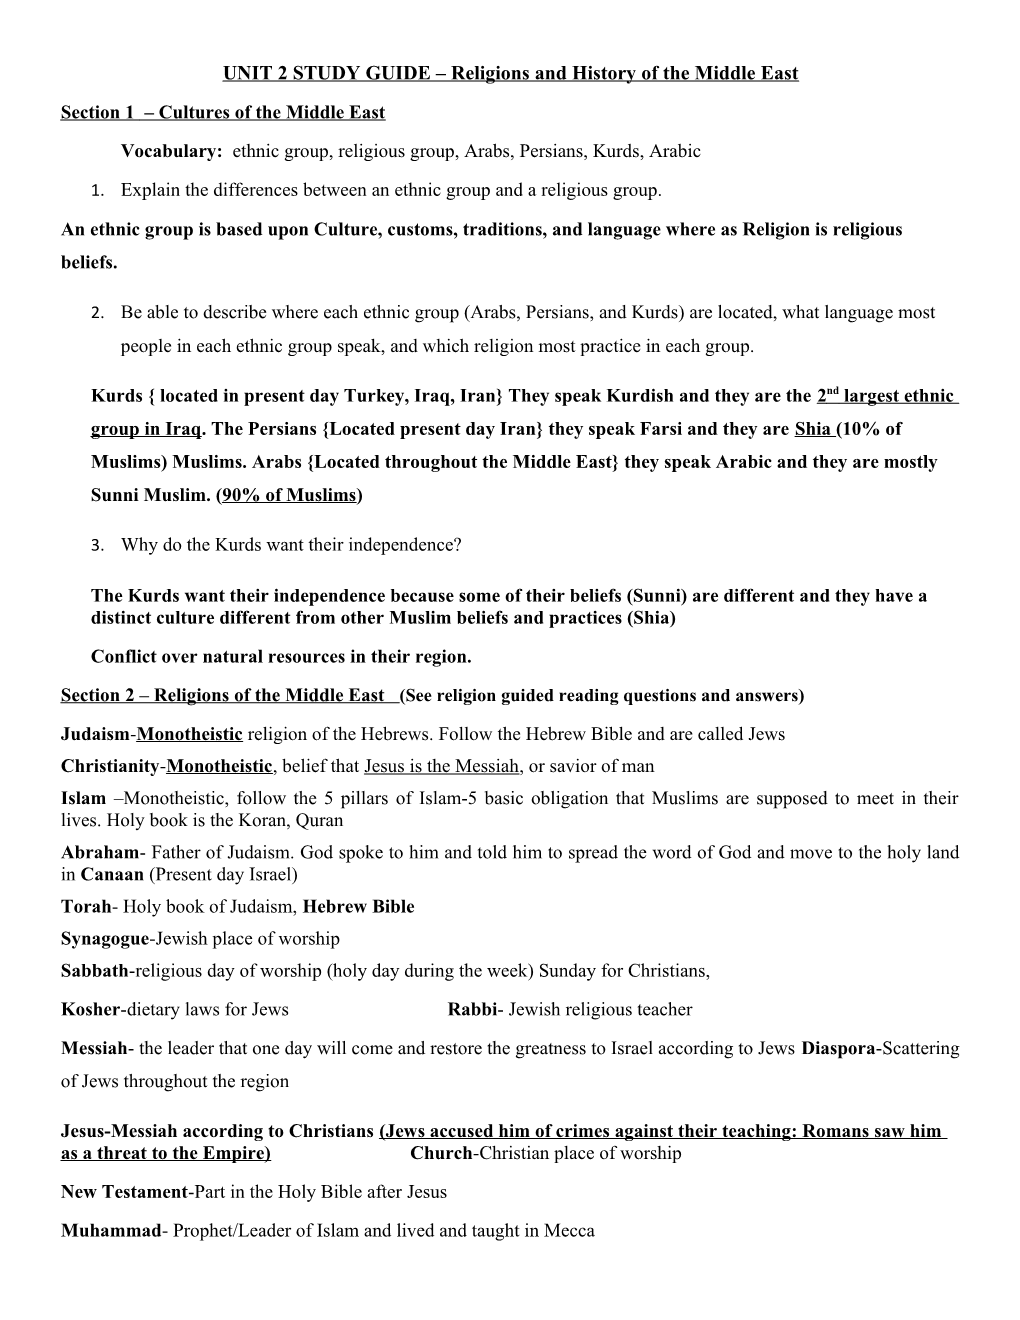 UNIT 2 STUDY GUIDE Religions and History of the Middle East